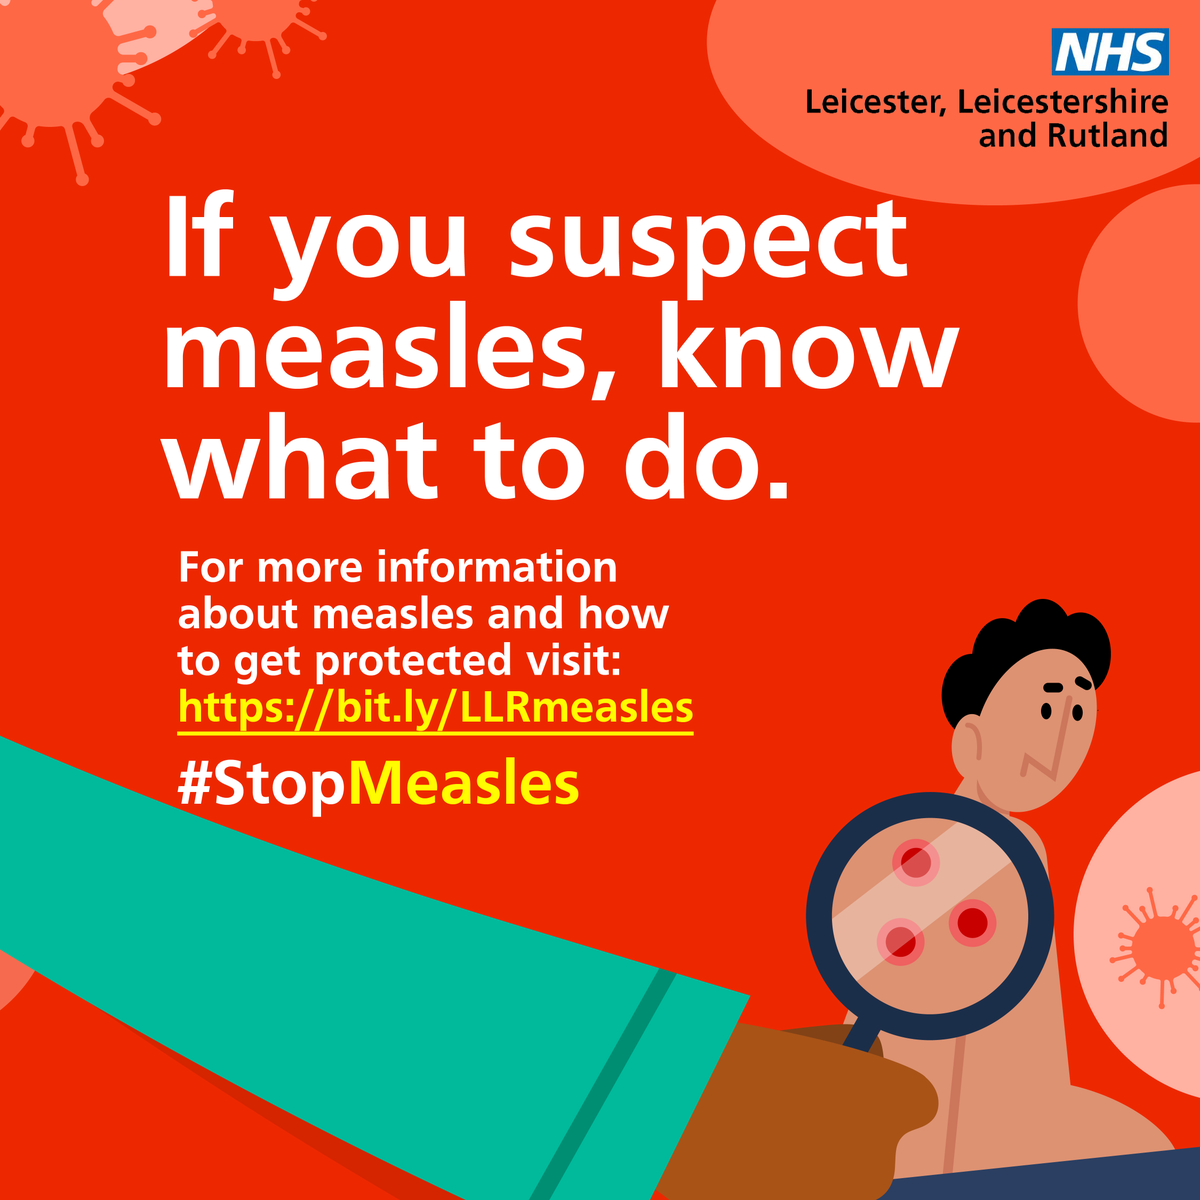 If you, or your child, have symptoms of measles you’re advised to stay at home (or keep your child at home) and contact your GP or NHS 111 for advice. For more information about measles and a full list of symptoms, visit: …erleicestershireandrutland.icb.nhs.uk/nhs-vaccinatio….